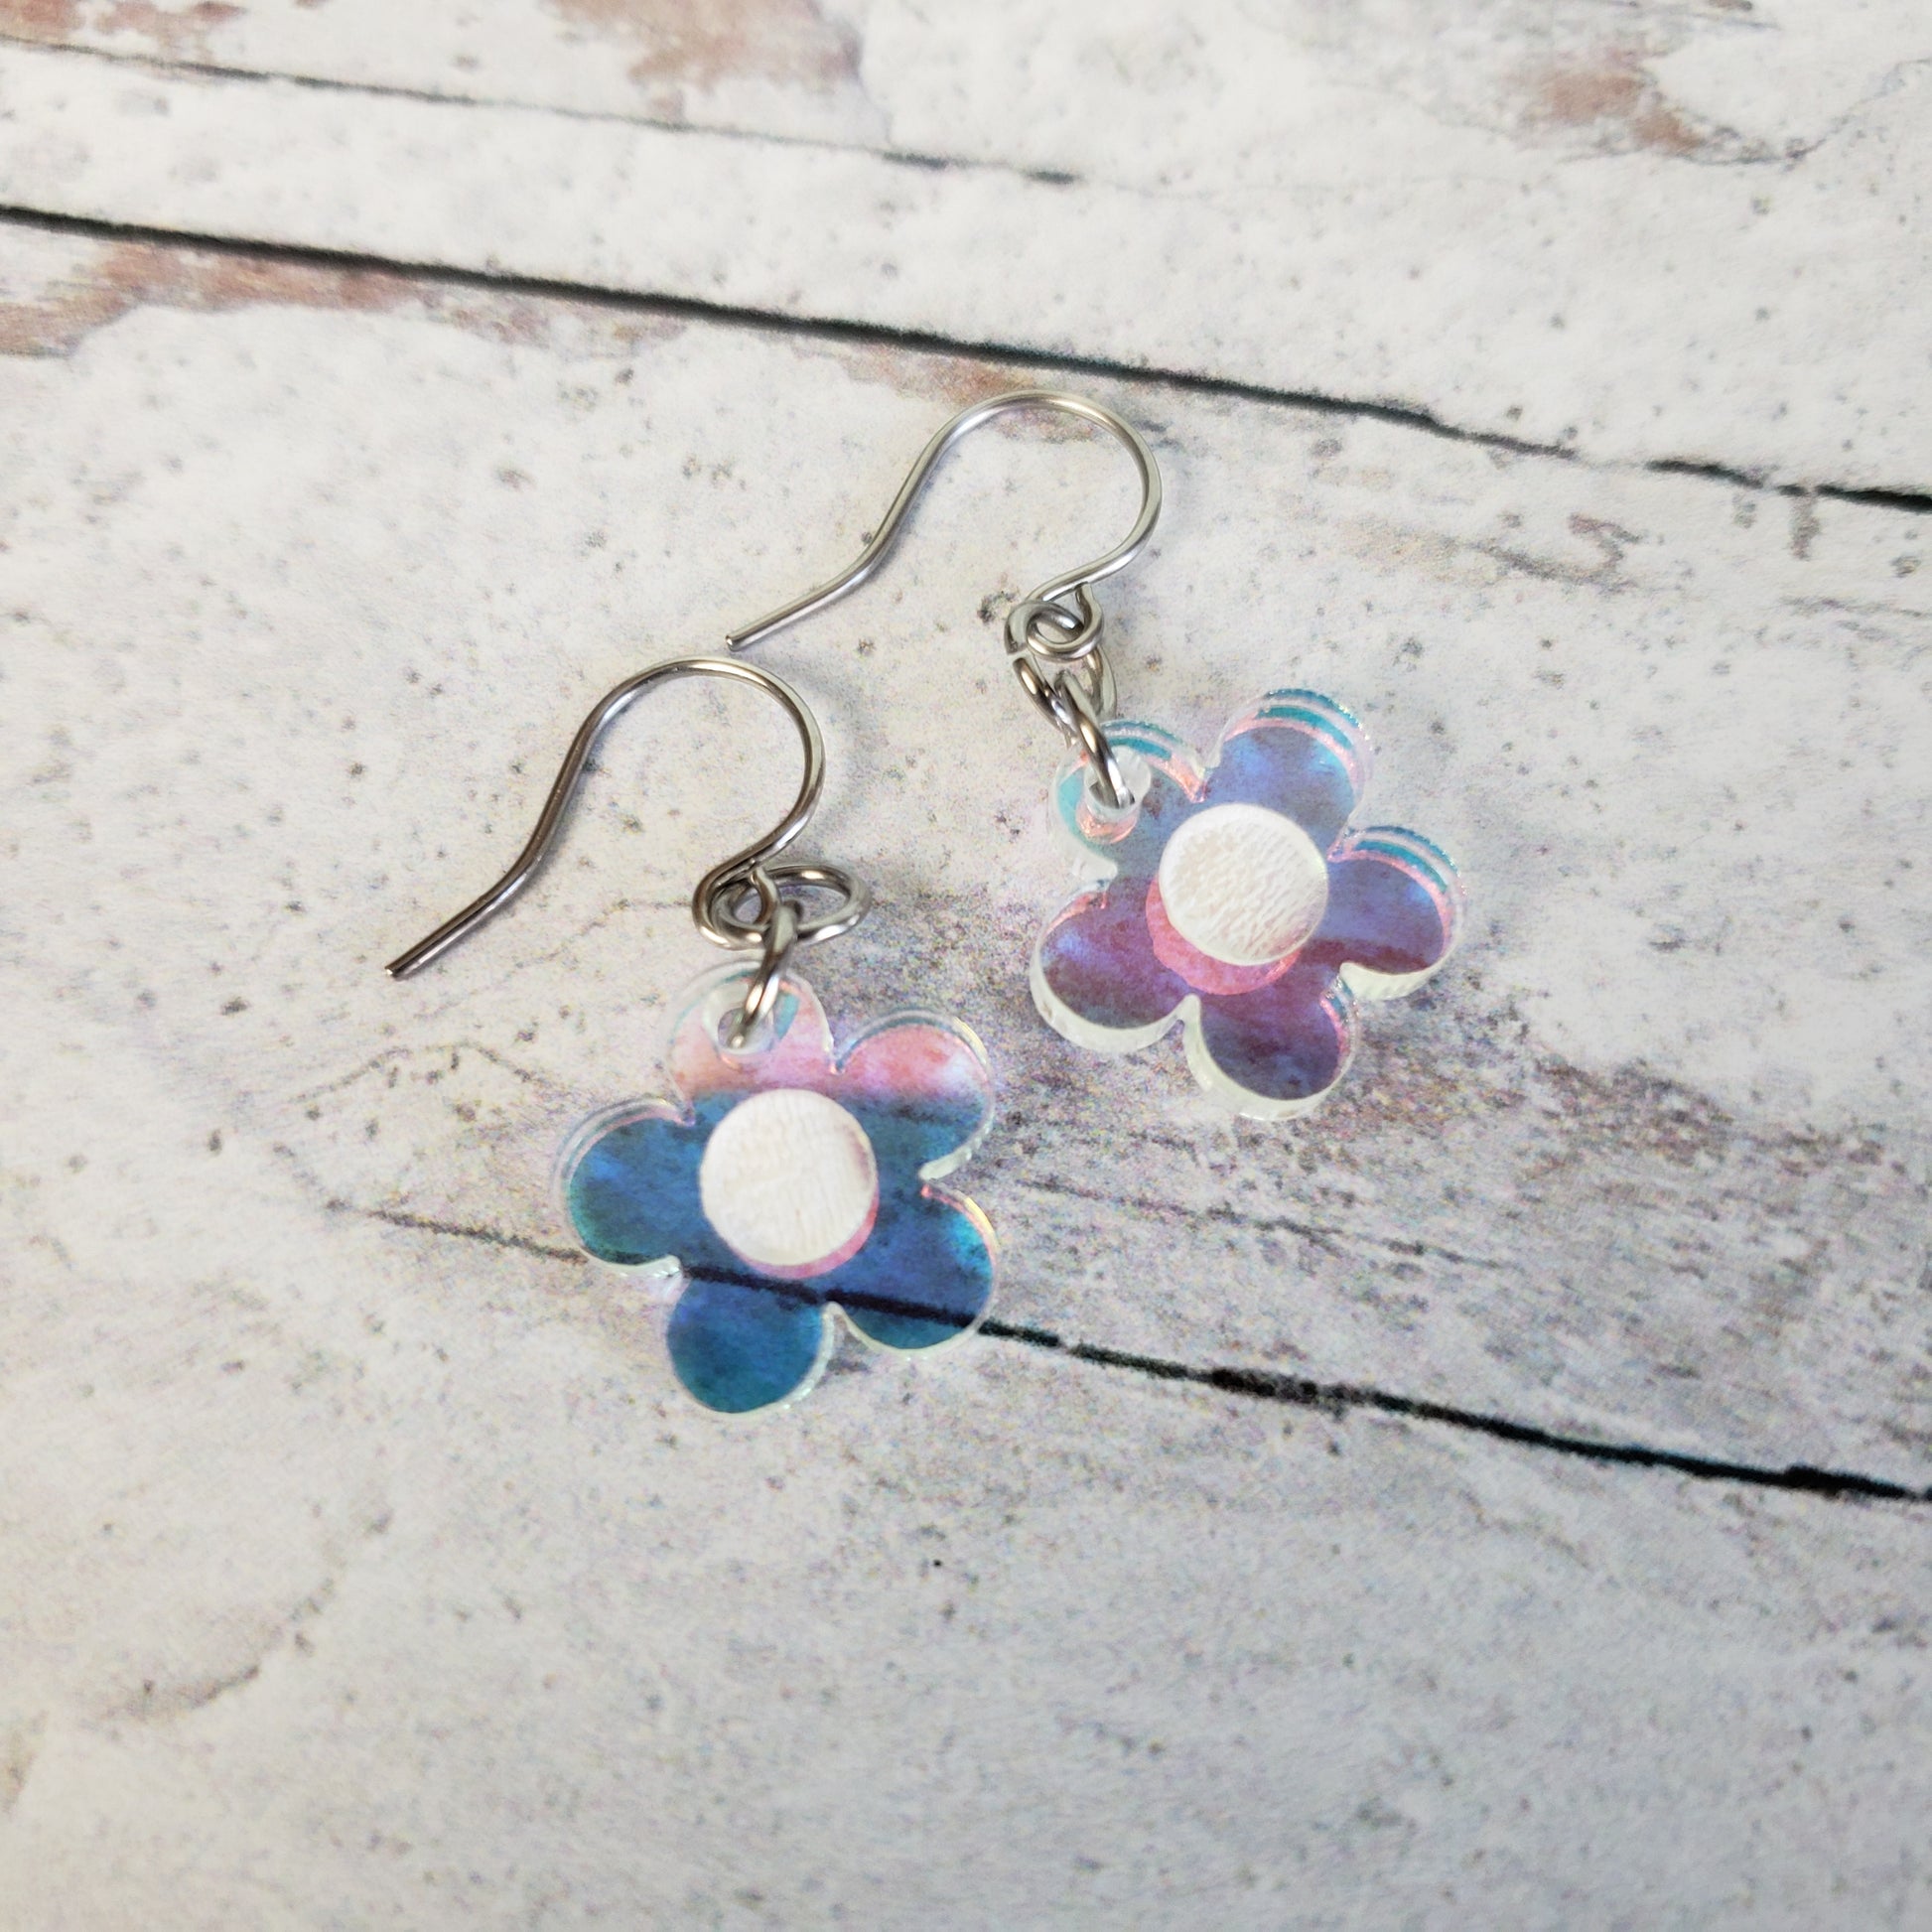 Small rainbow iridescent daisy flowers on small stainless steel ear wires.